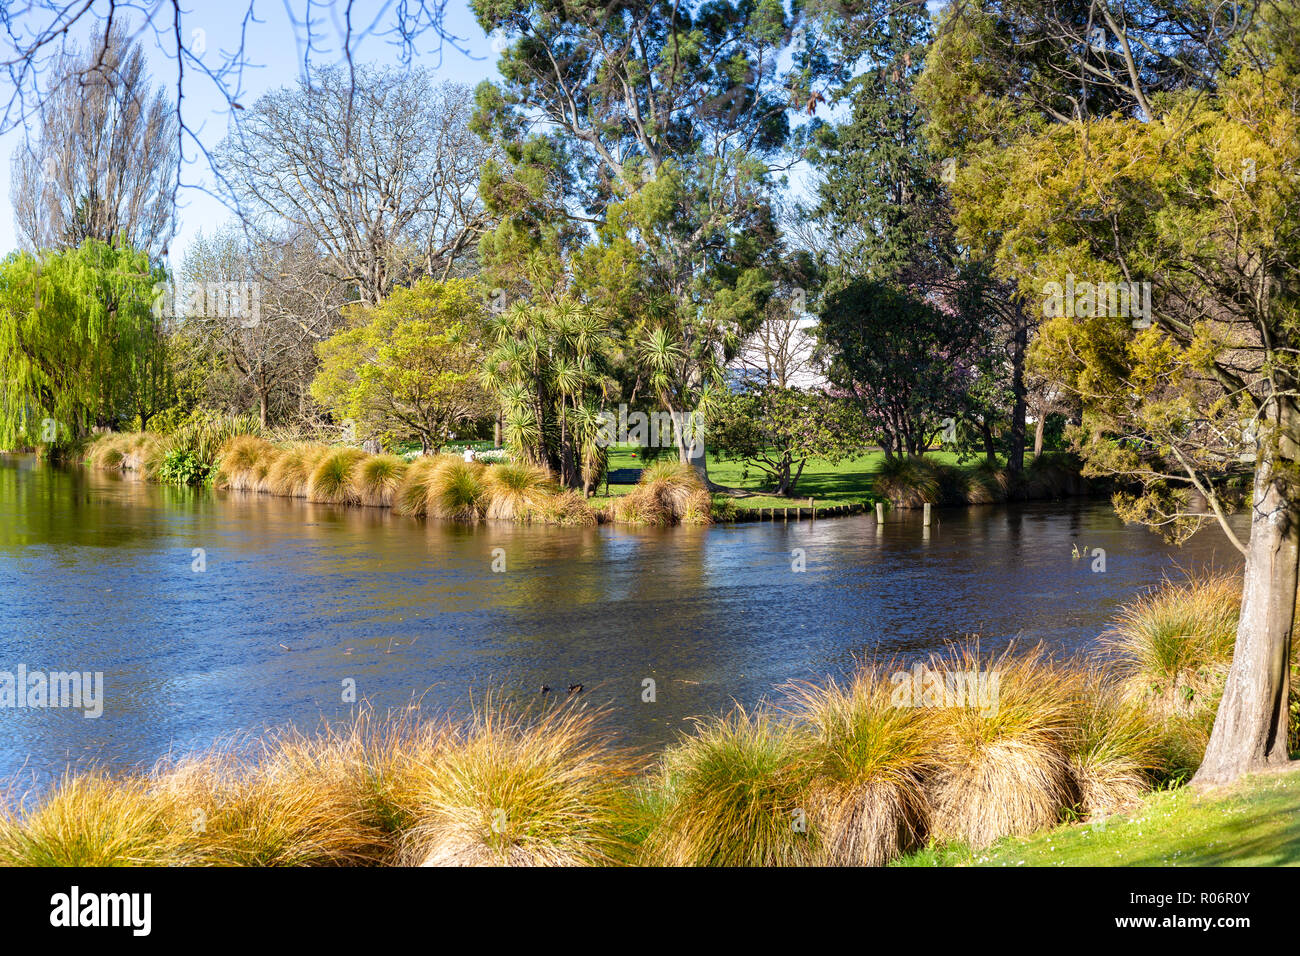 The afternoon sun casts a golden glow over the trees and shrubs lining the river at Mona Vale, Christchurch, New Zealand Stock Photo